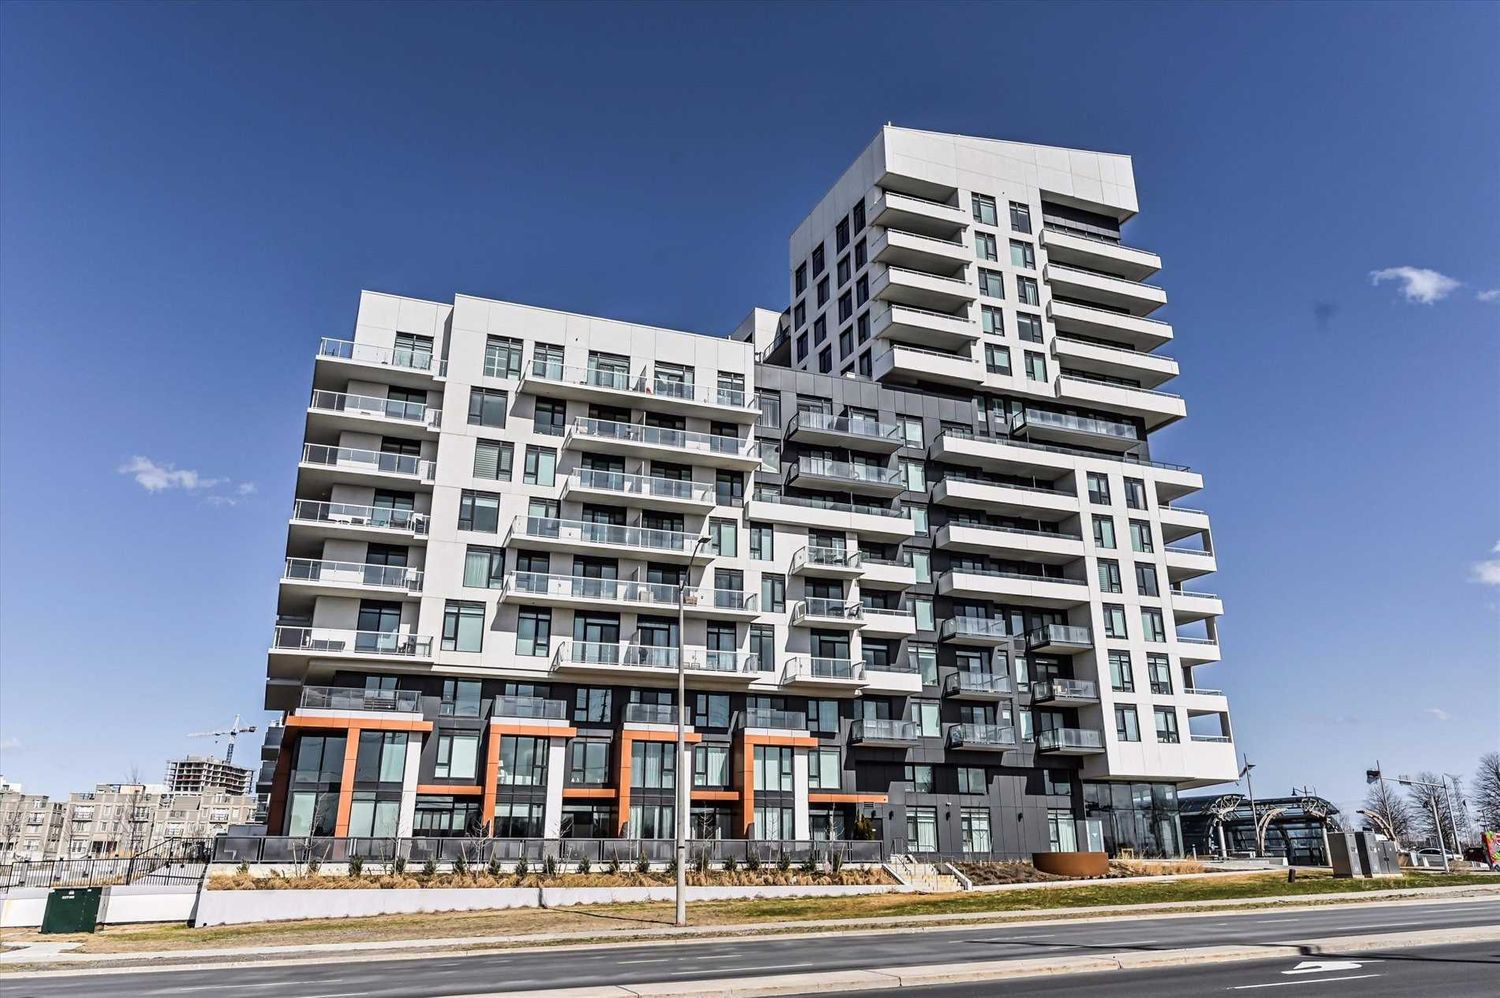 8-18 Rouge Valley Drive W. York Condos is located in  Markham, Toronto - image #2 of 2